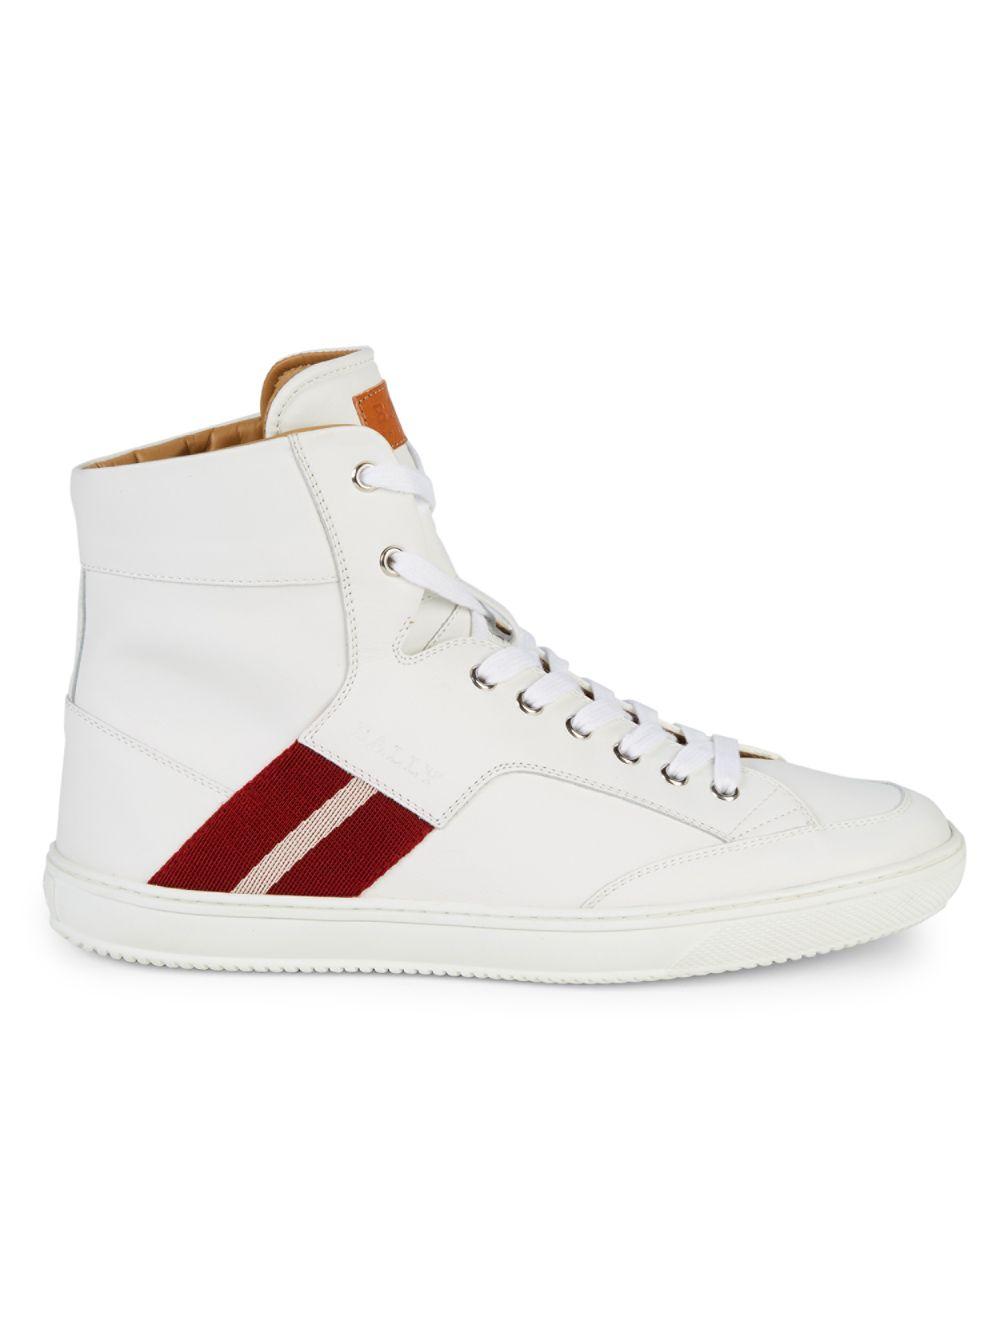 Bally Oldani High-top Leather Sneakers in White for Men - Lyst